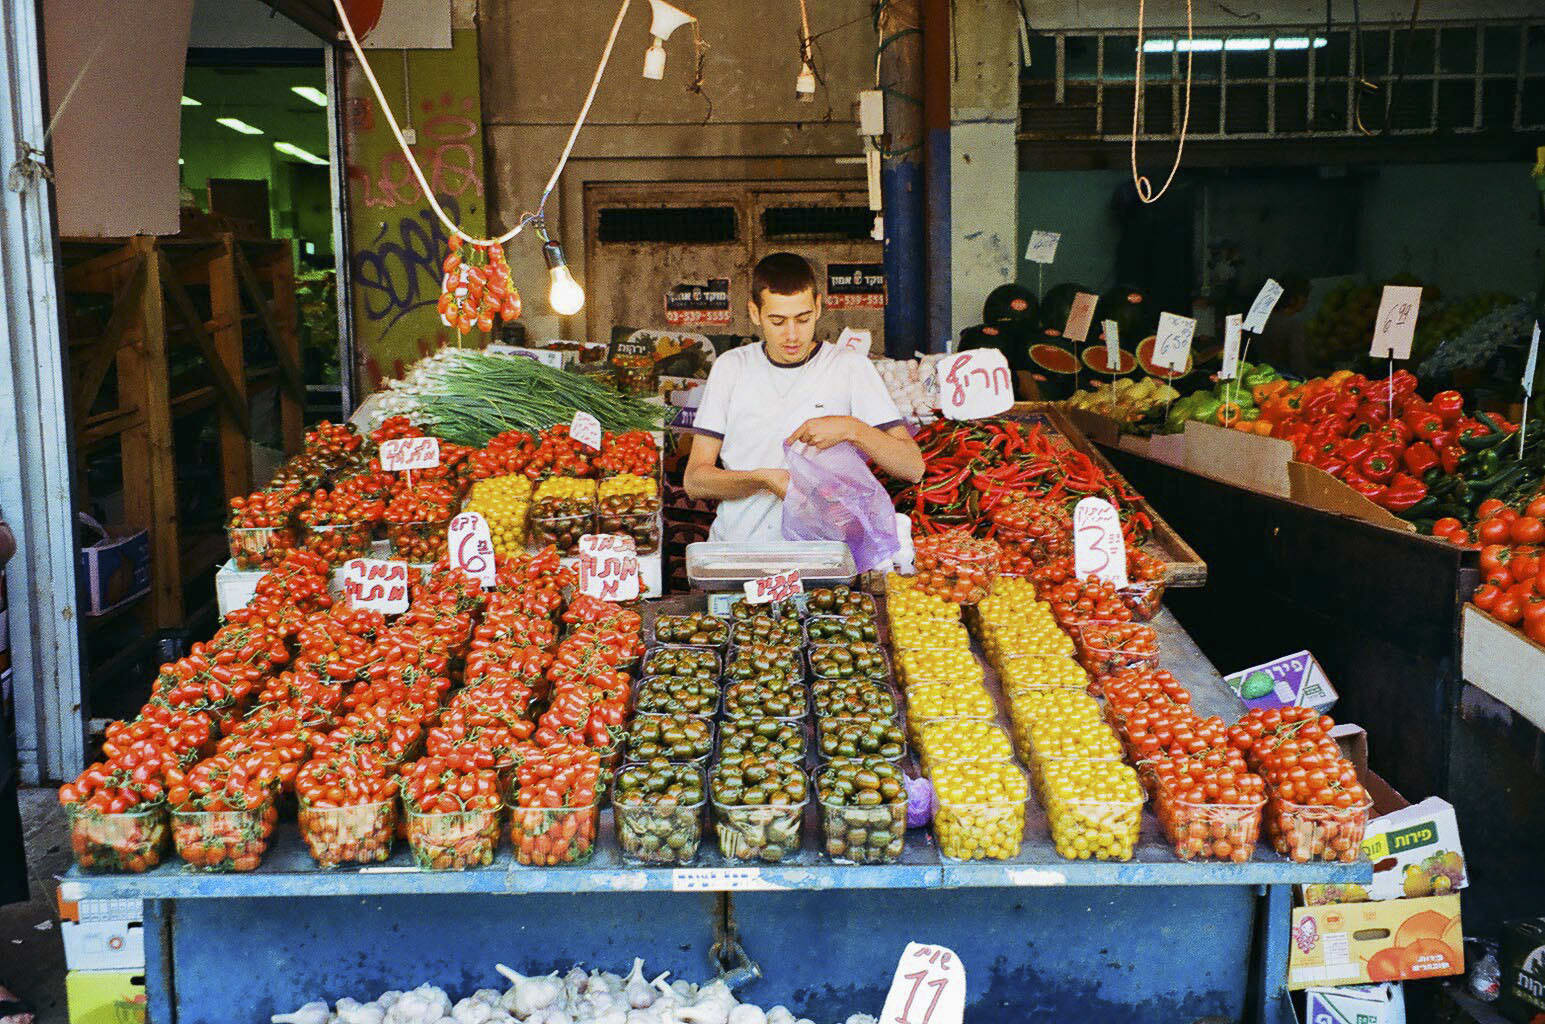 In an image provided by Eager Tourist, a produce market in Tel Aviv. From Mexico to Greece, plant-centric hotels, restaurants and tours are proliferating. 